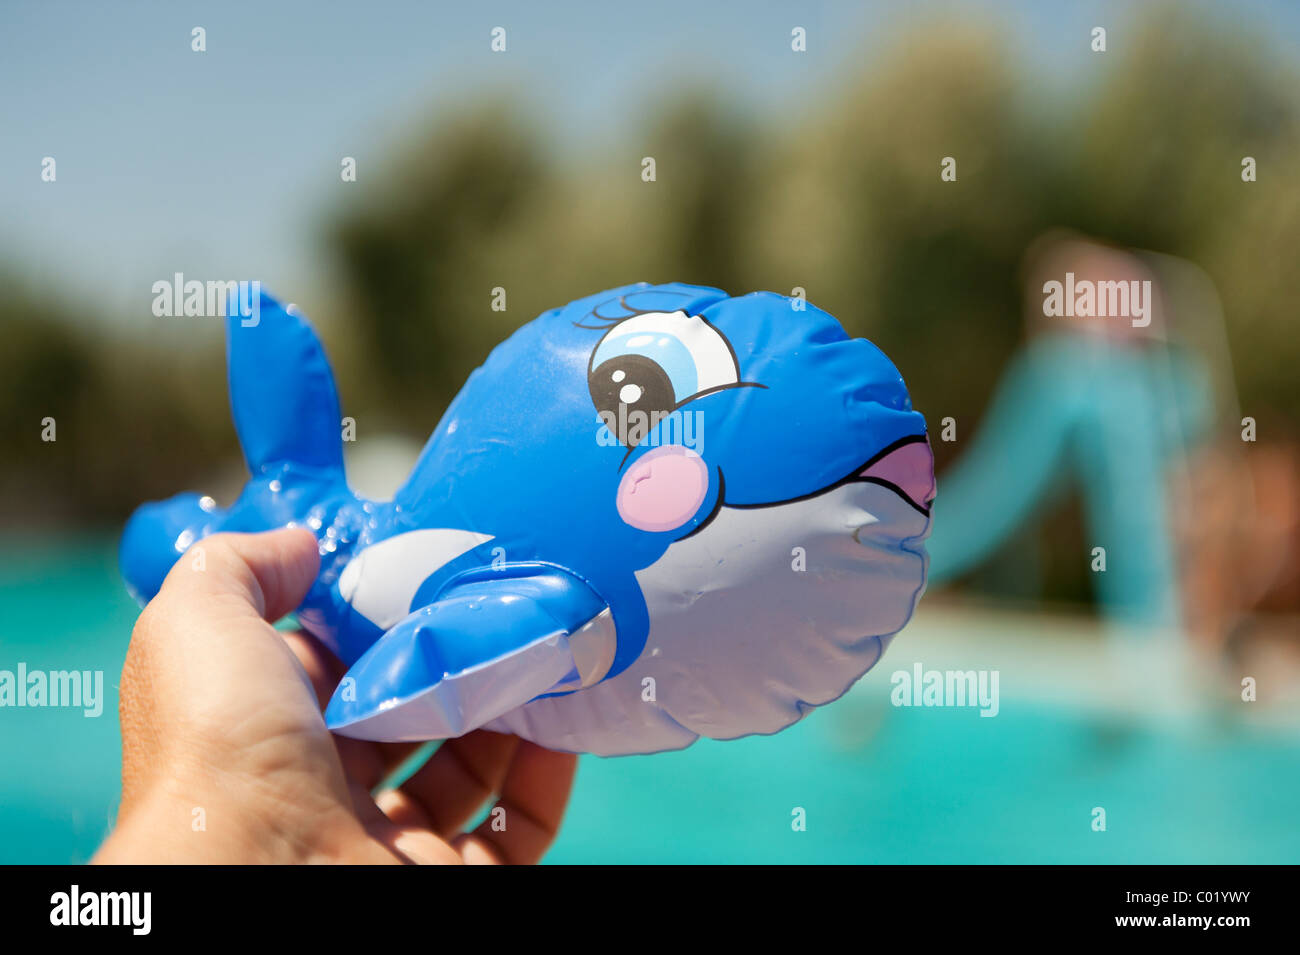 Floating fish toy near the swimming pool Stock Photo - Alamy